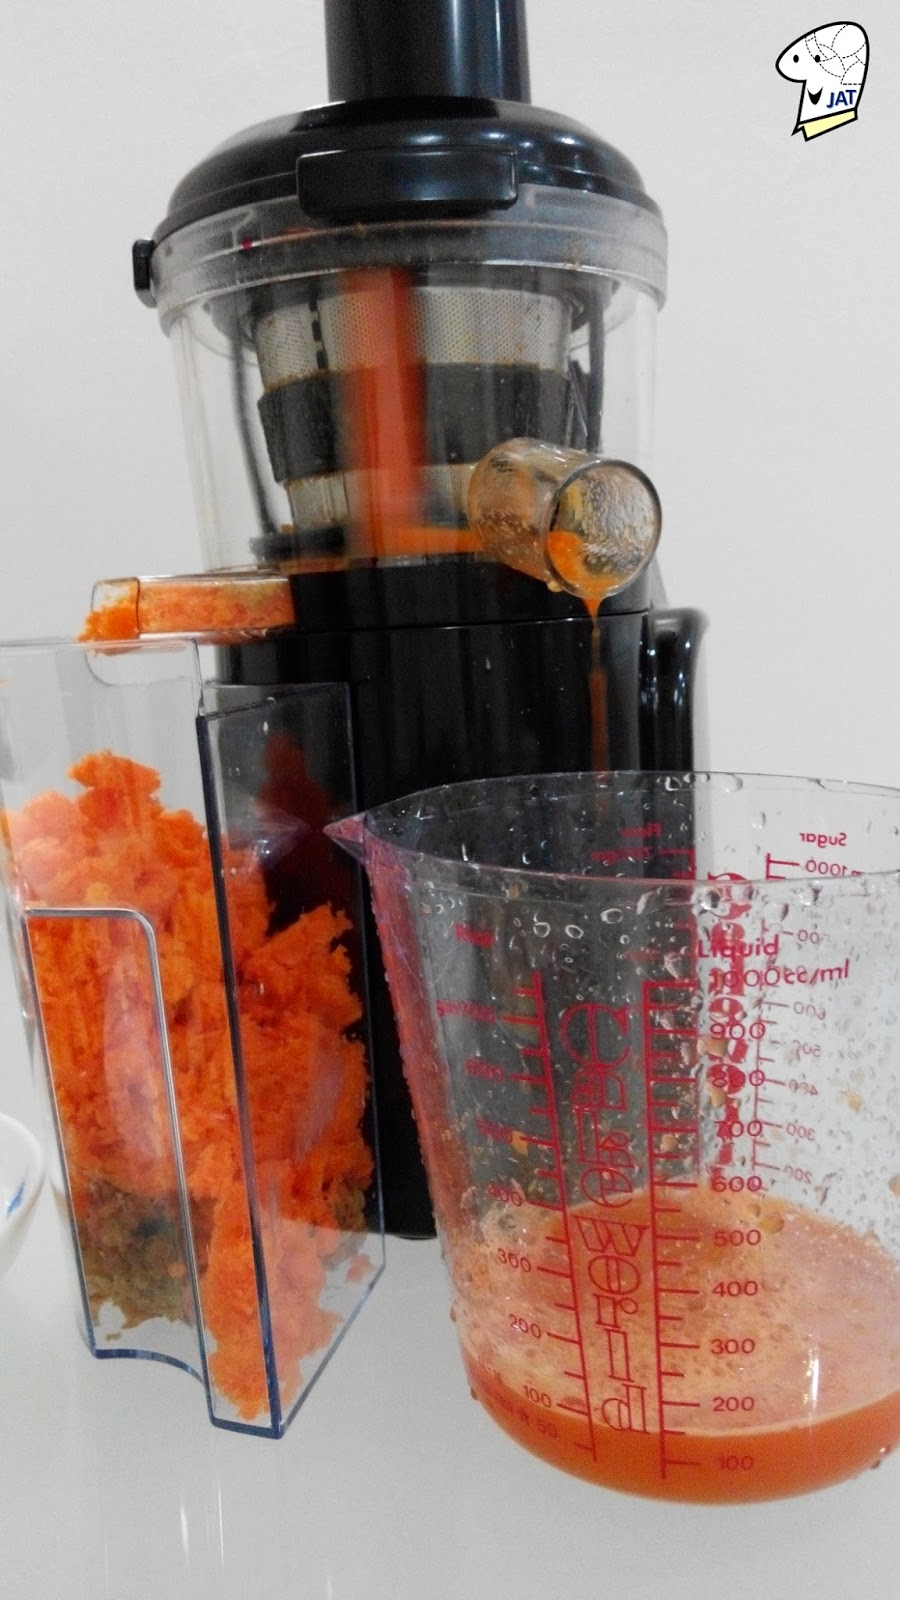 Bayers Dual Stage Slow Juicer, juicing and pulp produced.